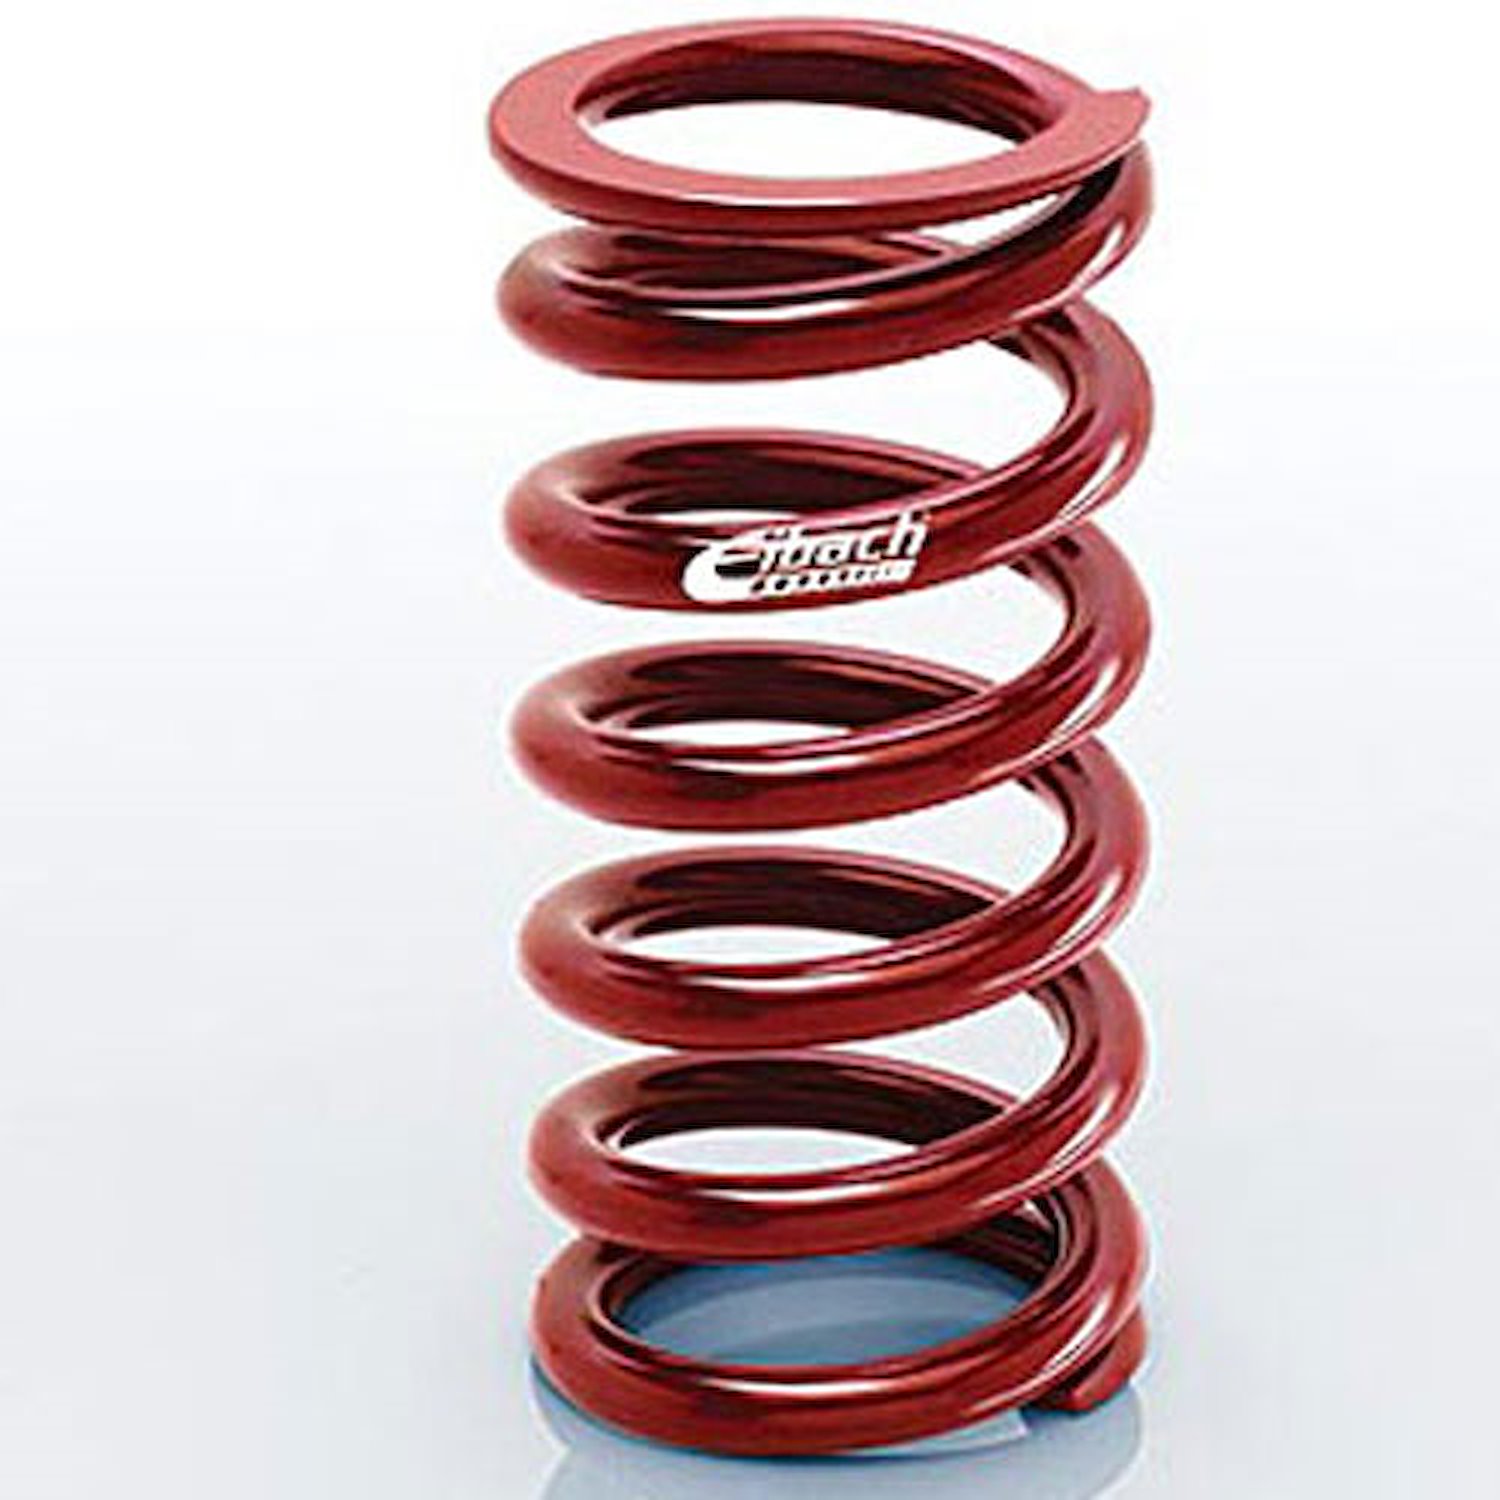 0950.500.1100 EIBACH CONVENTIONAL FRONT SPRING